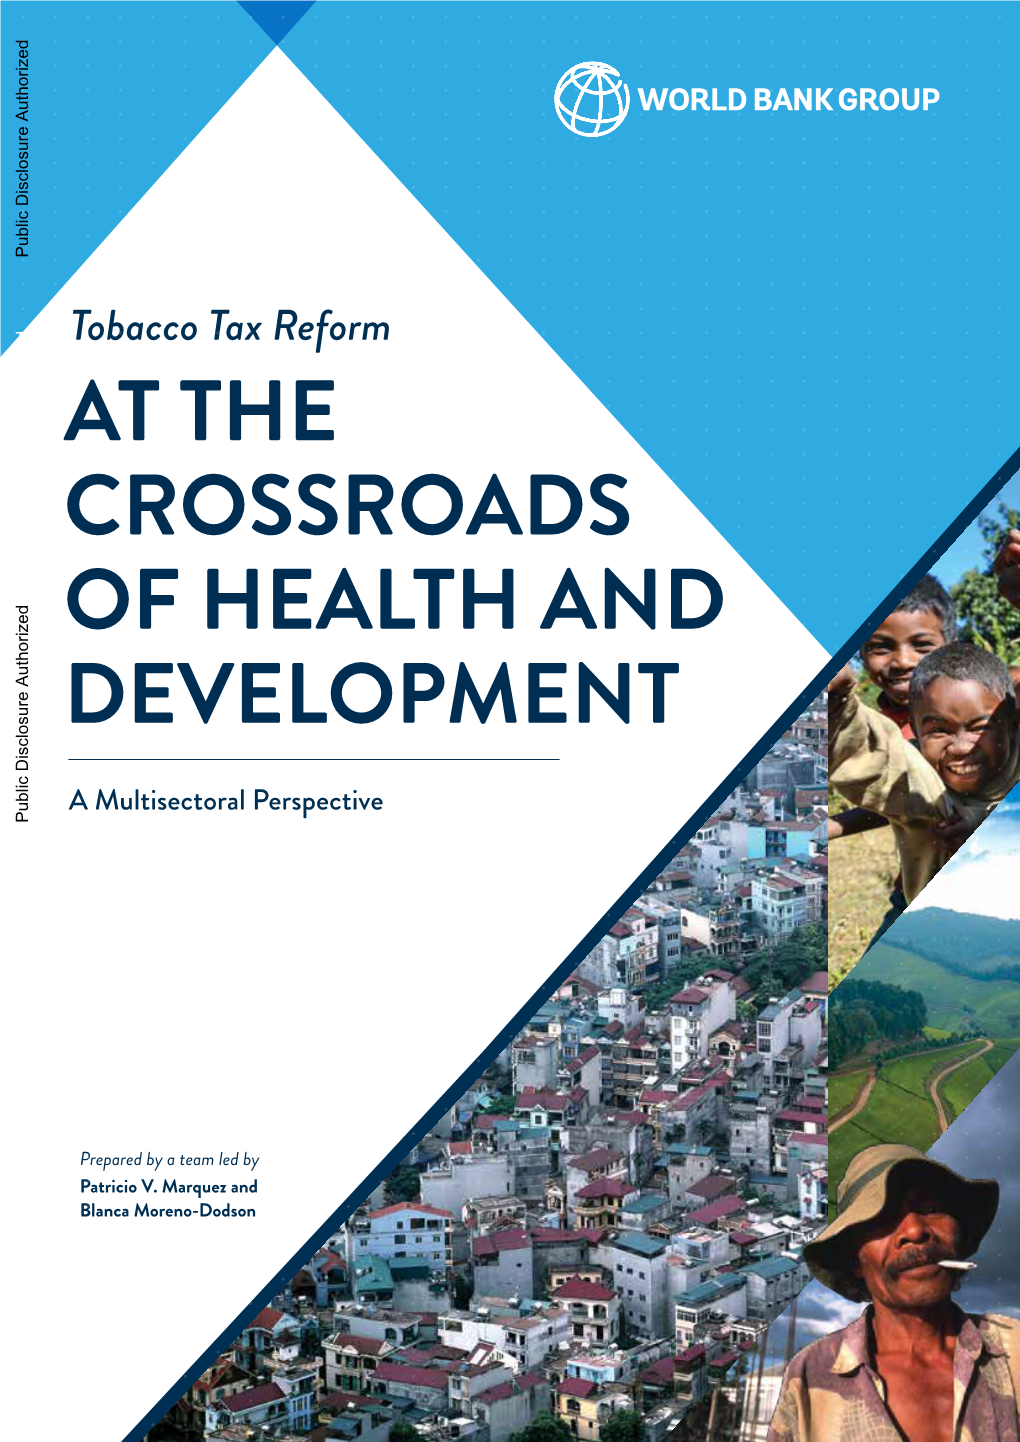 Tobacco Tax Reform at the CROSSROADS of HEALTH and DEVELOPMENT